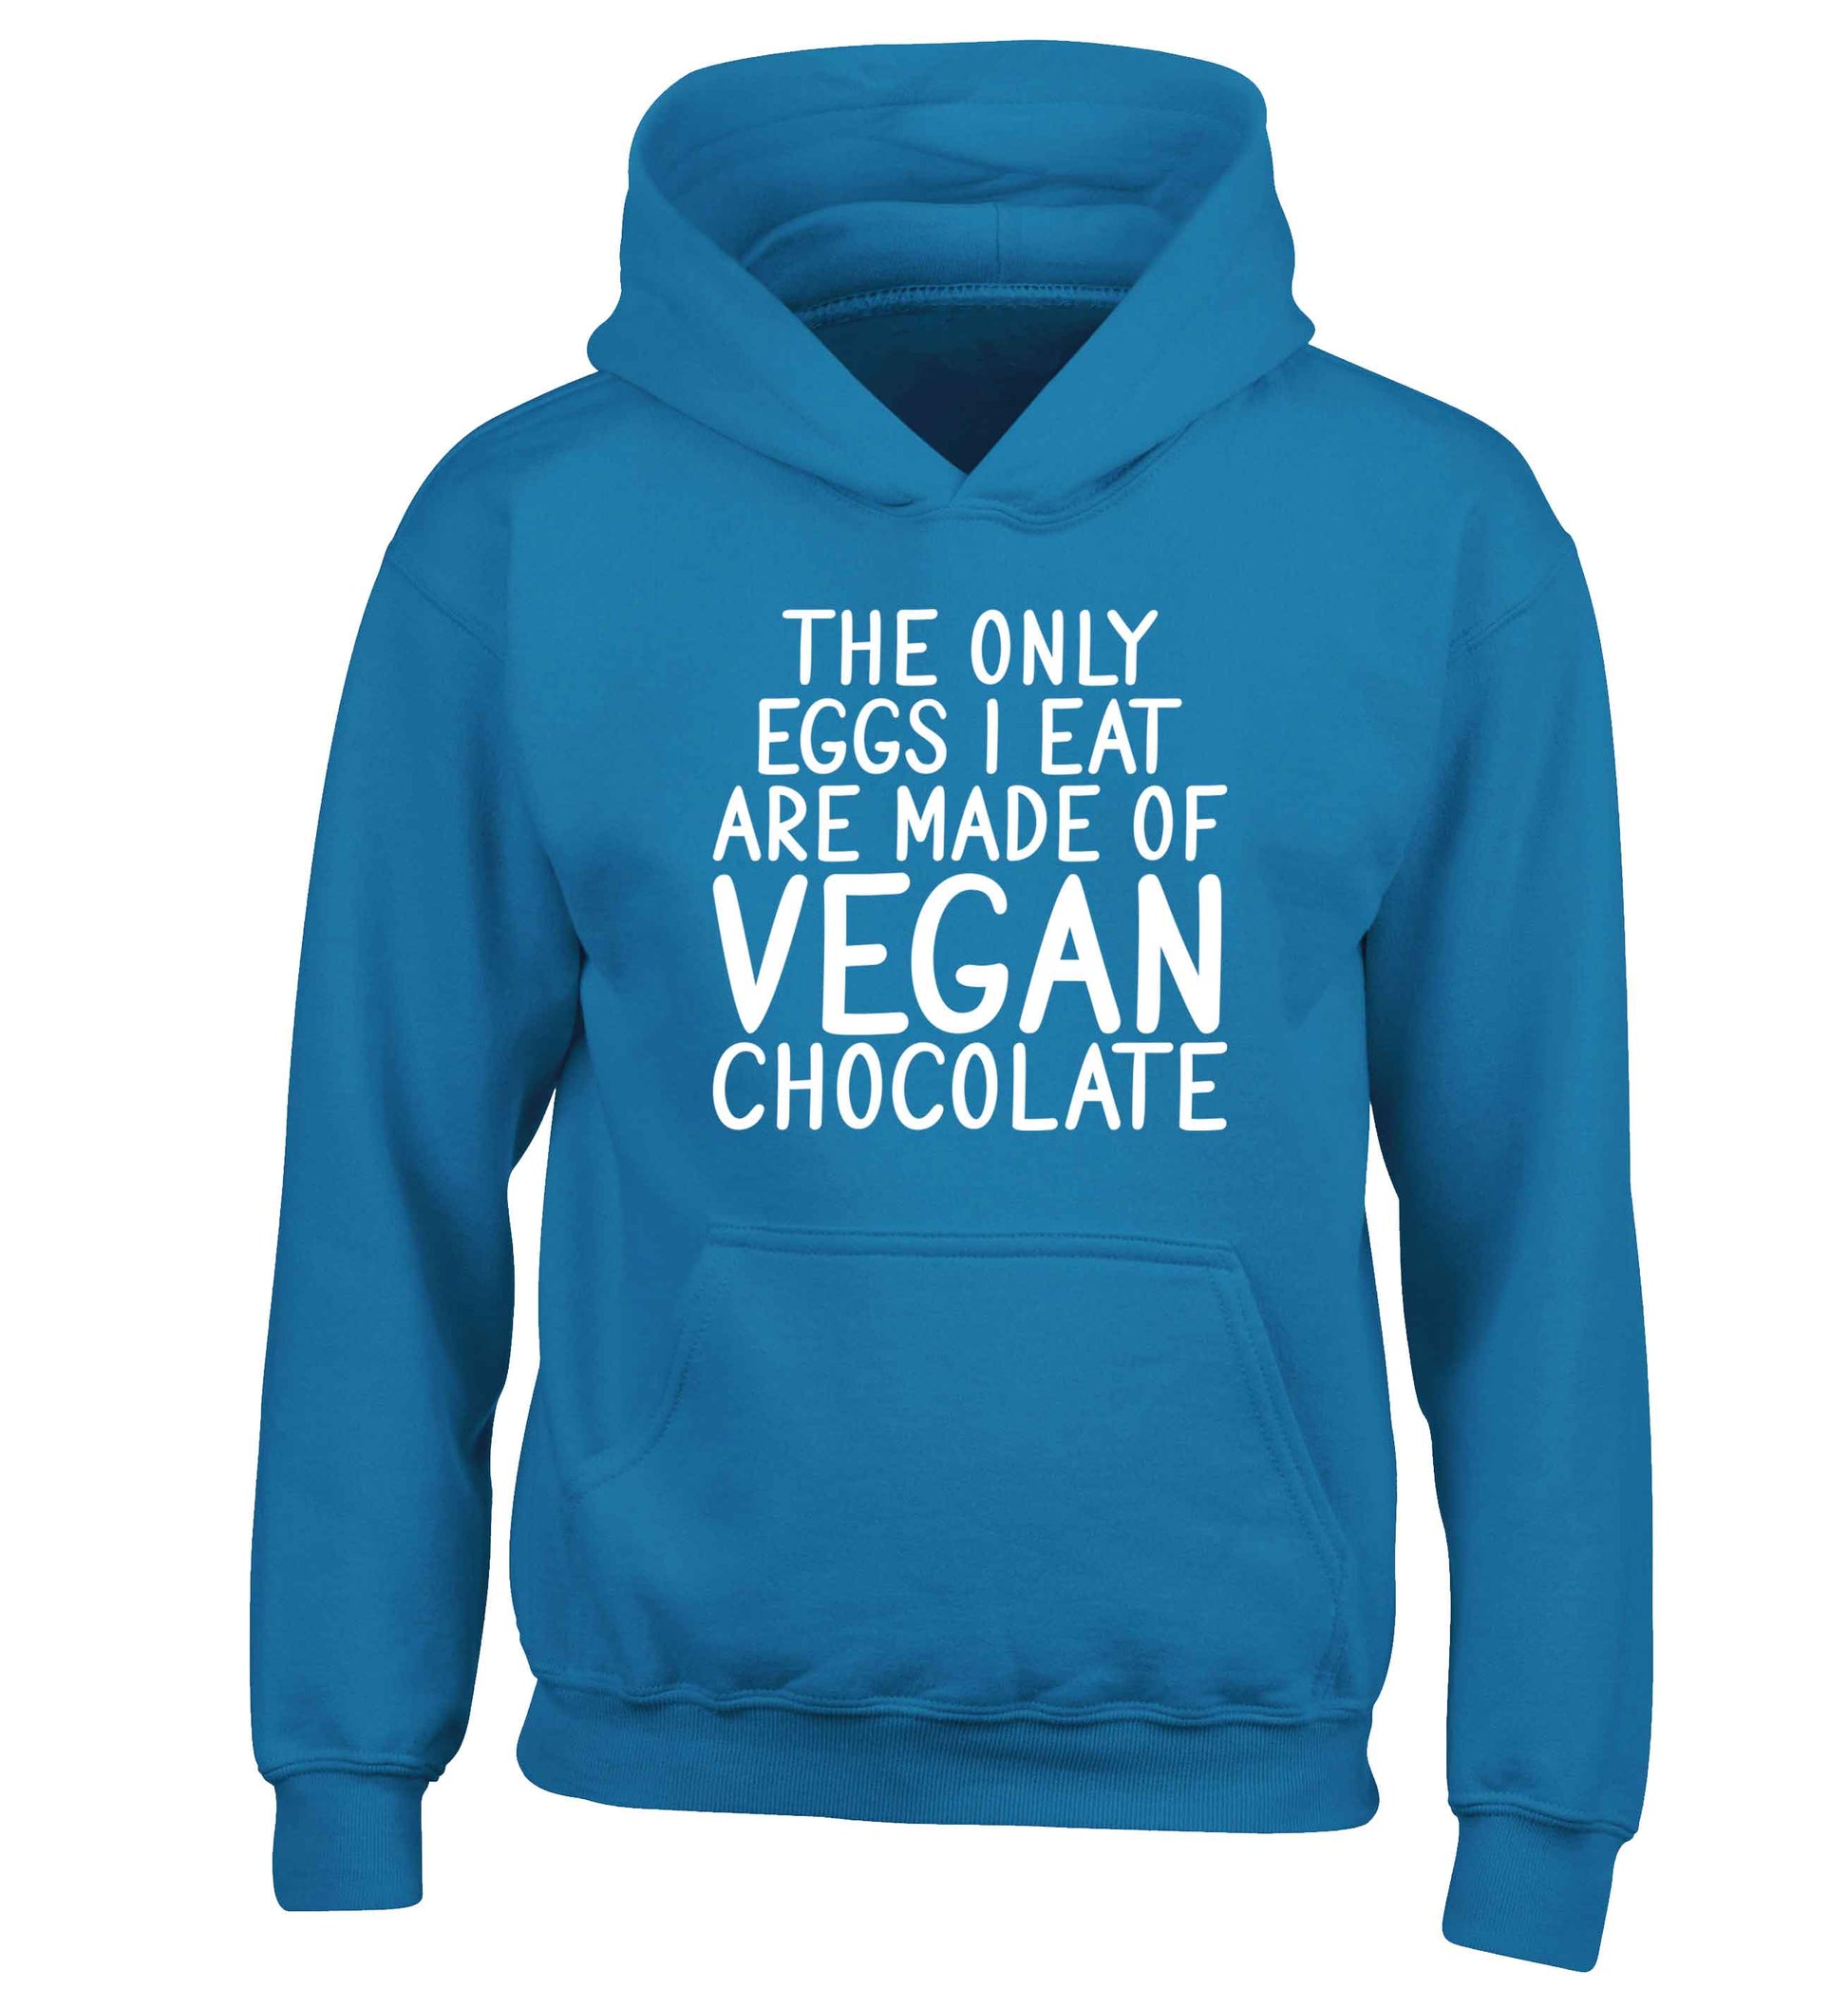 The only eggs I eat are made of vegan chocolate children's blue hoodie 12-13 Years